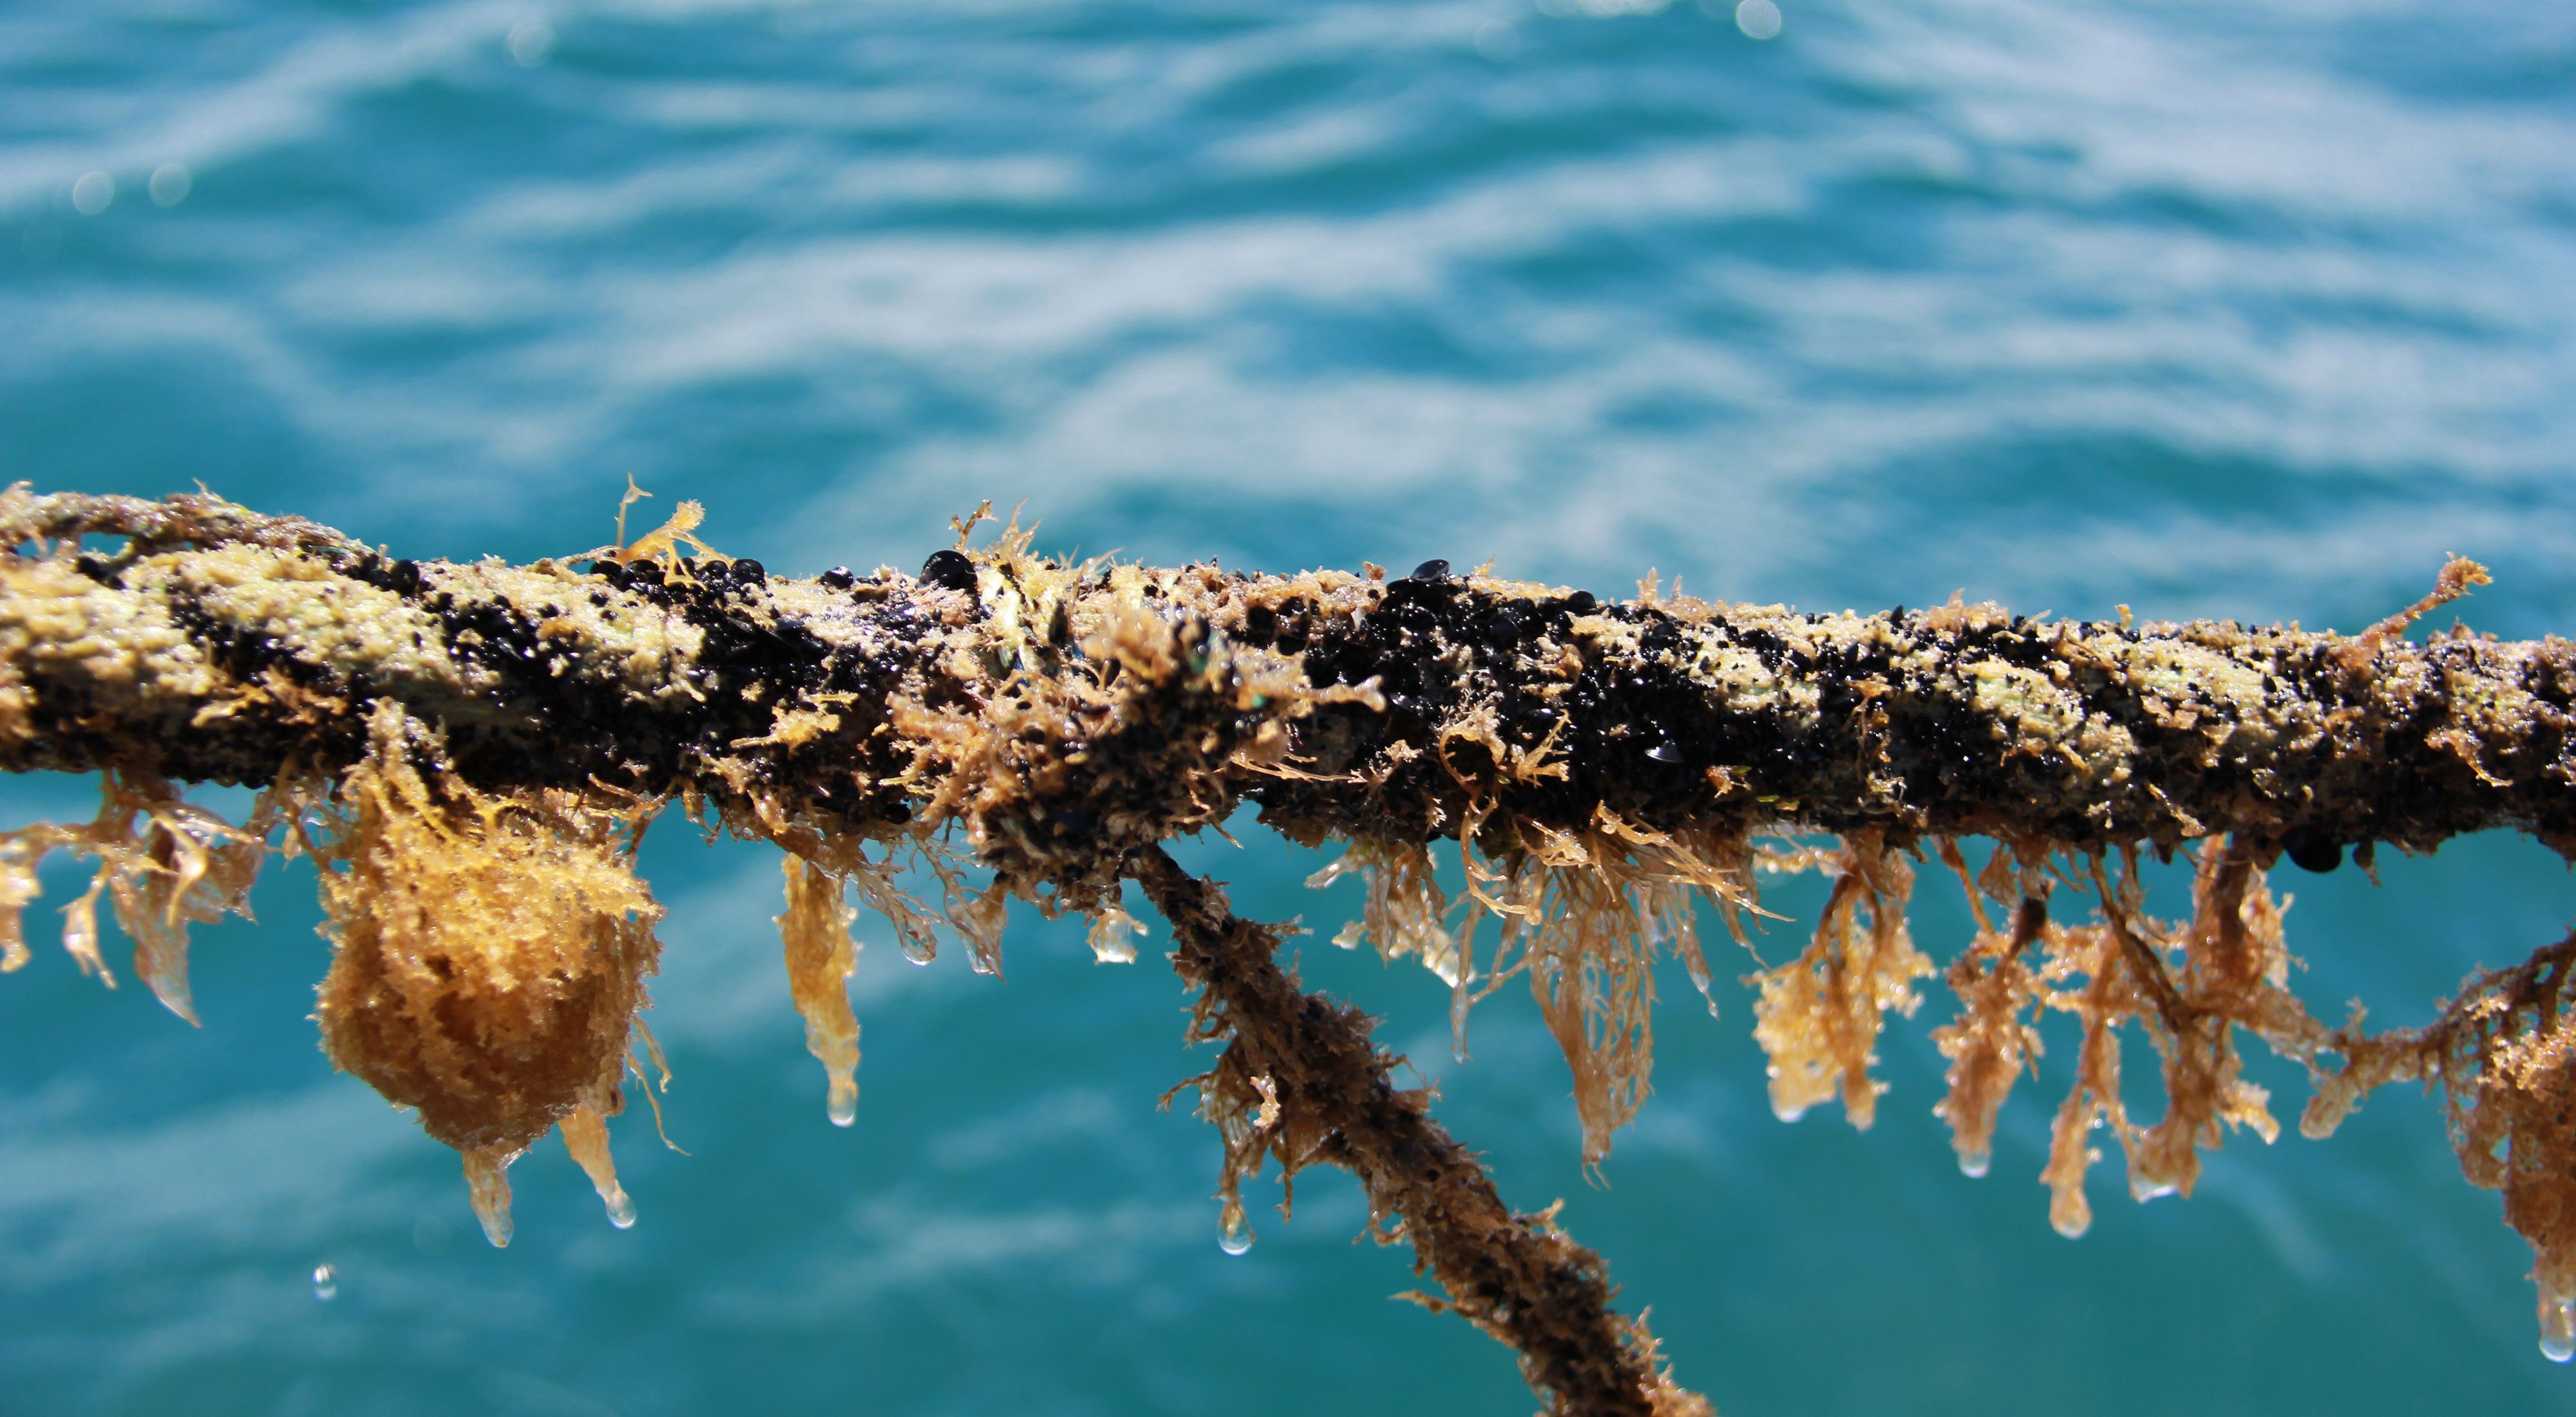 Growing on a rope at a shellfish aquaculture farm